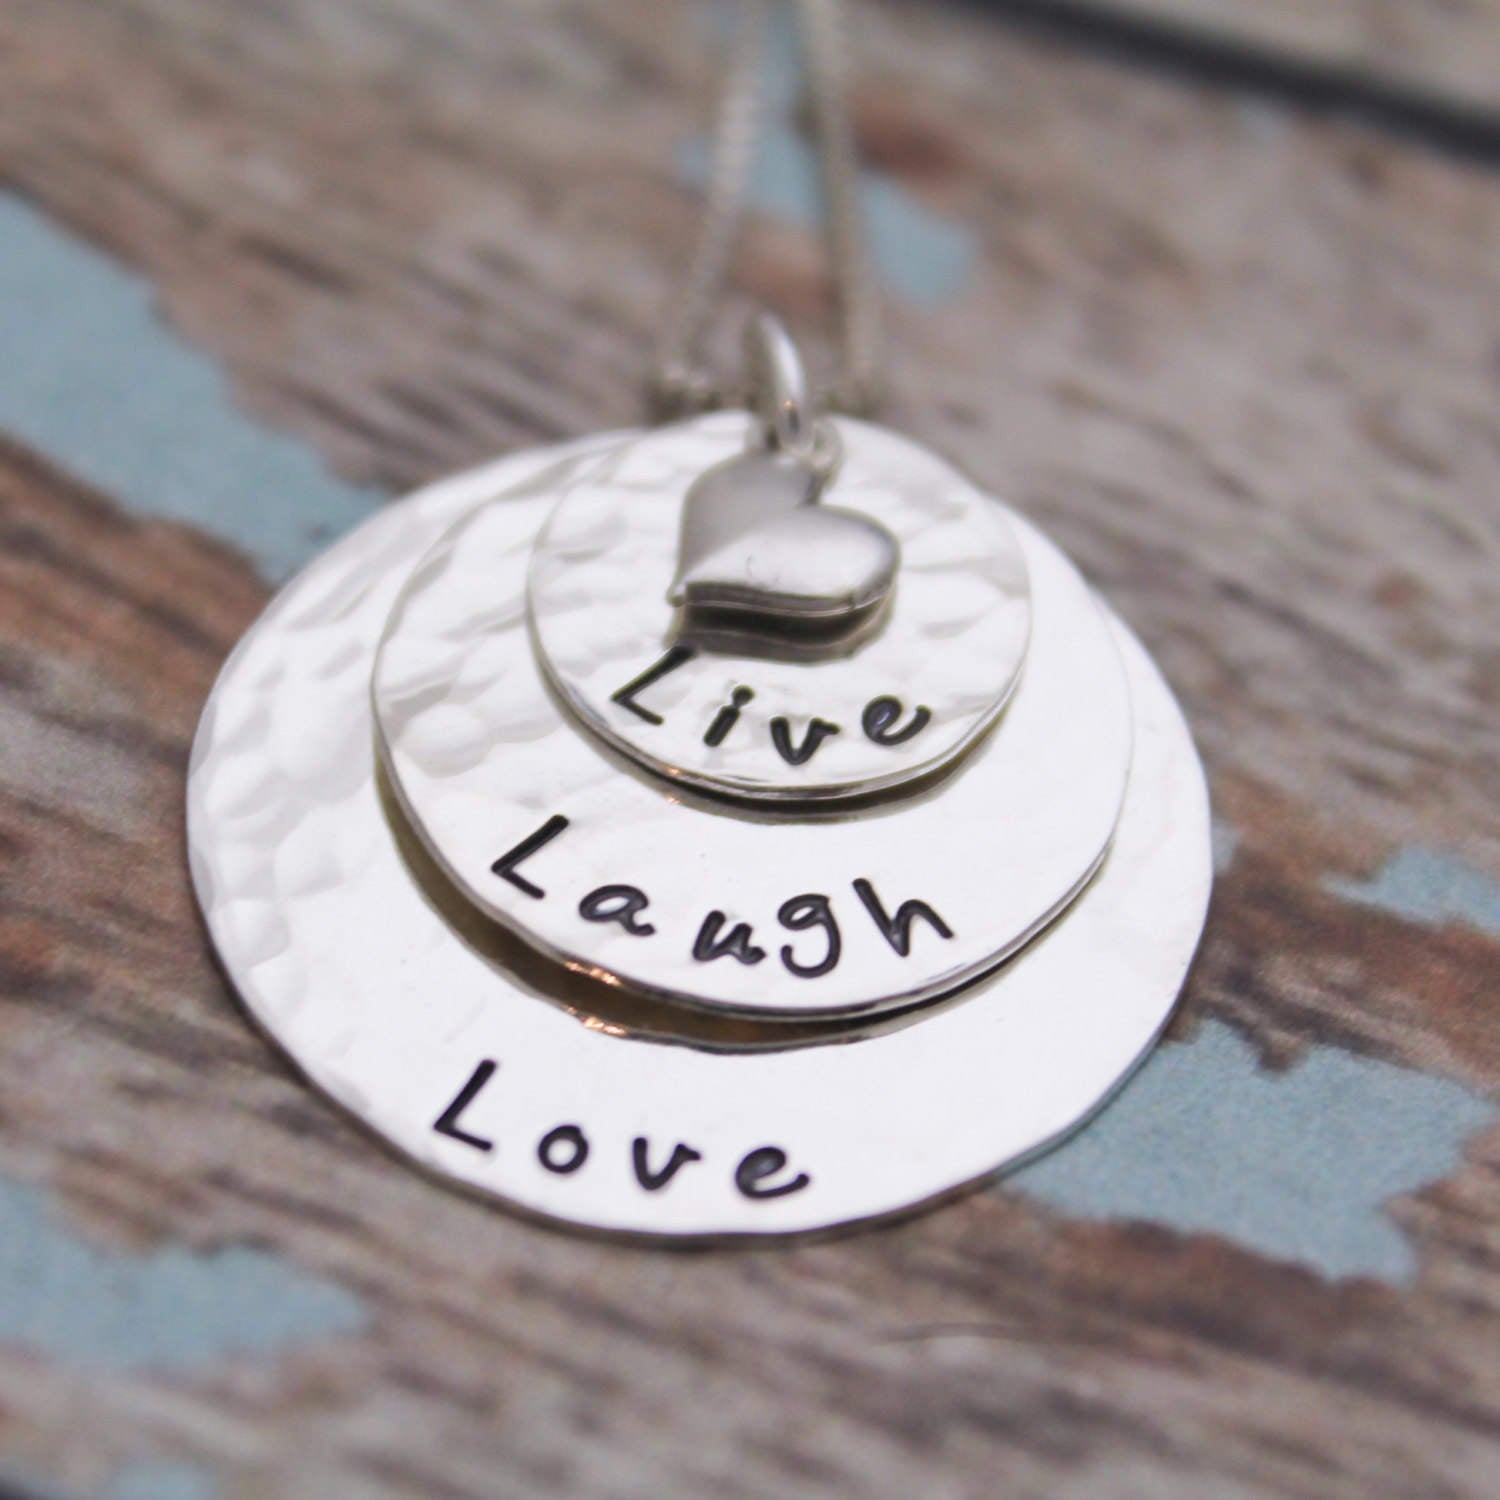 Personalized Layered Mother Necklace, Three (3) Layers Mom Necklace, Hand Stamped Jewelry, Personalized Jewelry, Custom, Sterling Silver